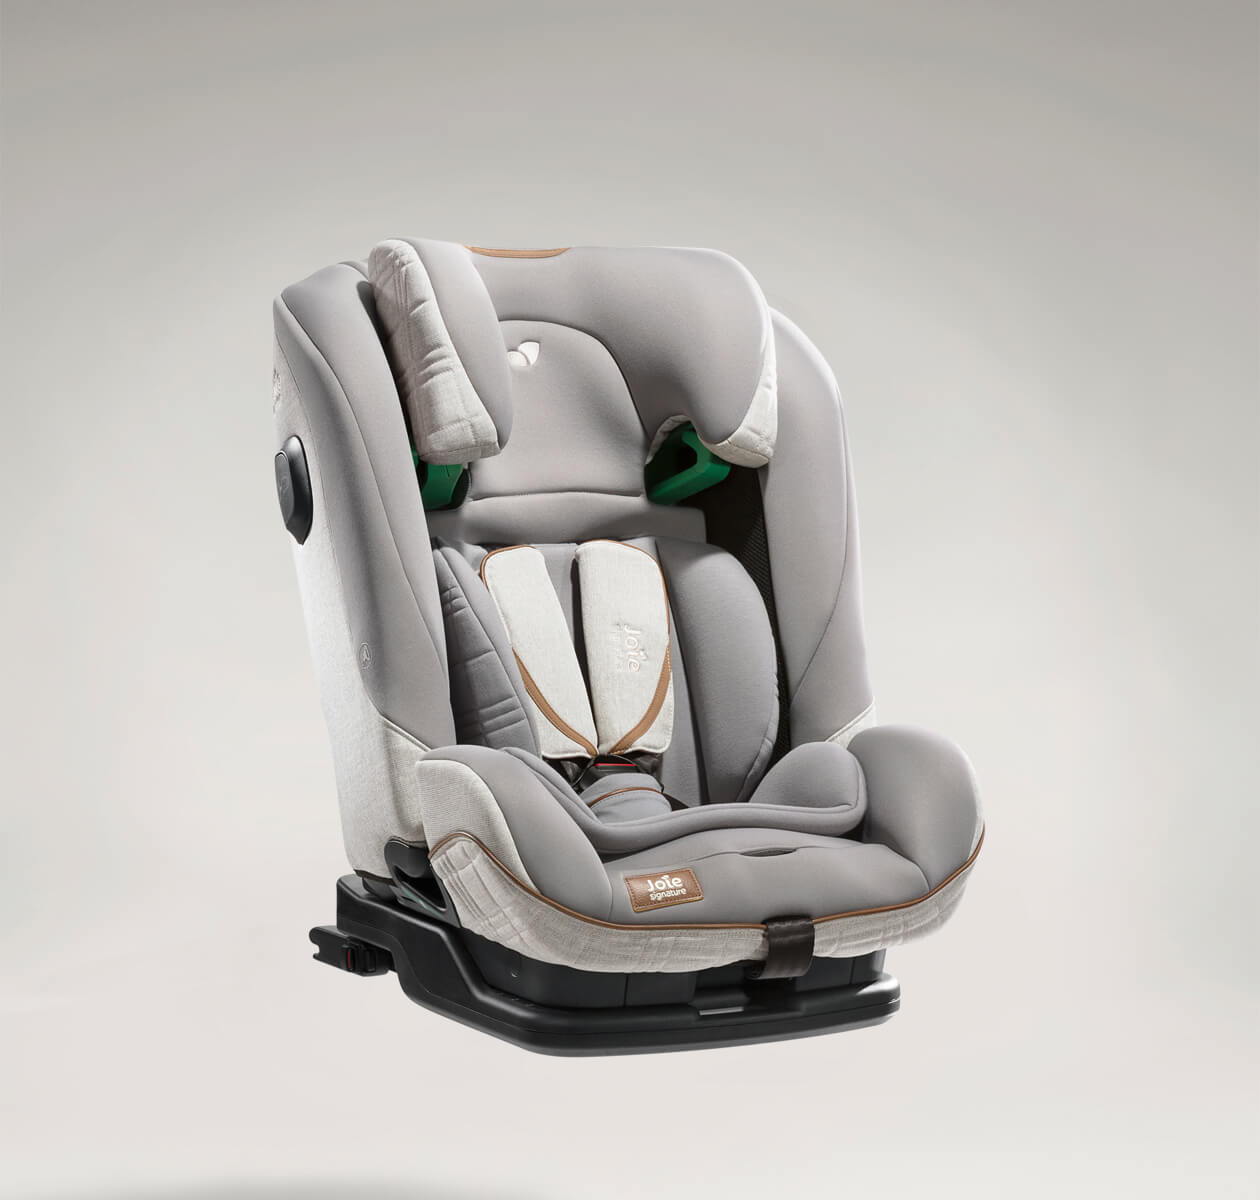  Joie signature i-Plenti car seat in gray at an angle.